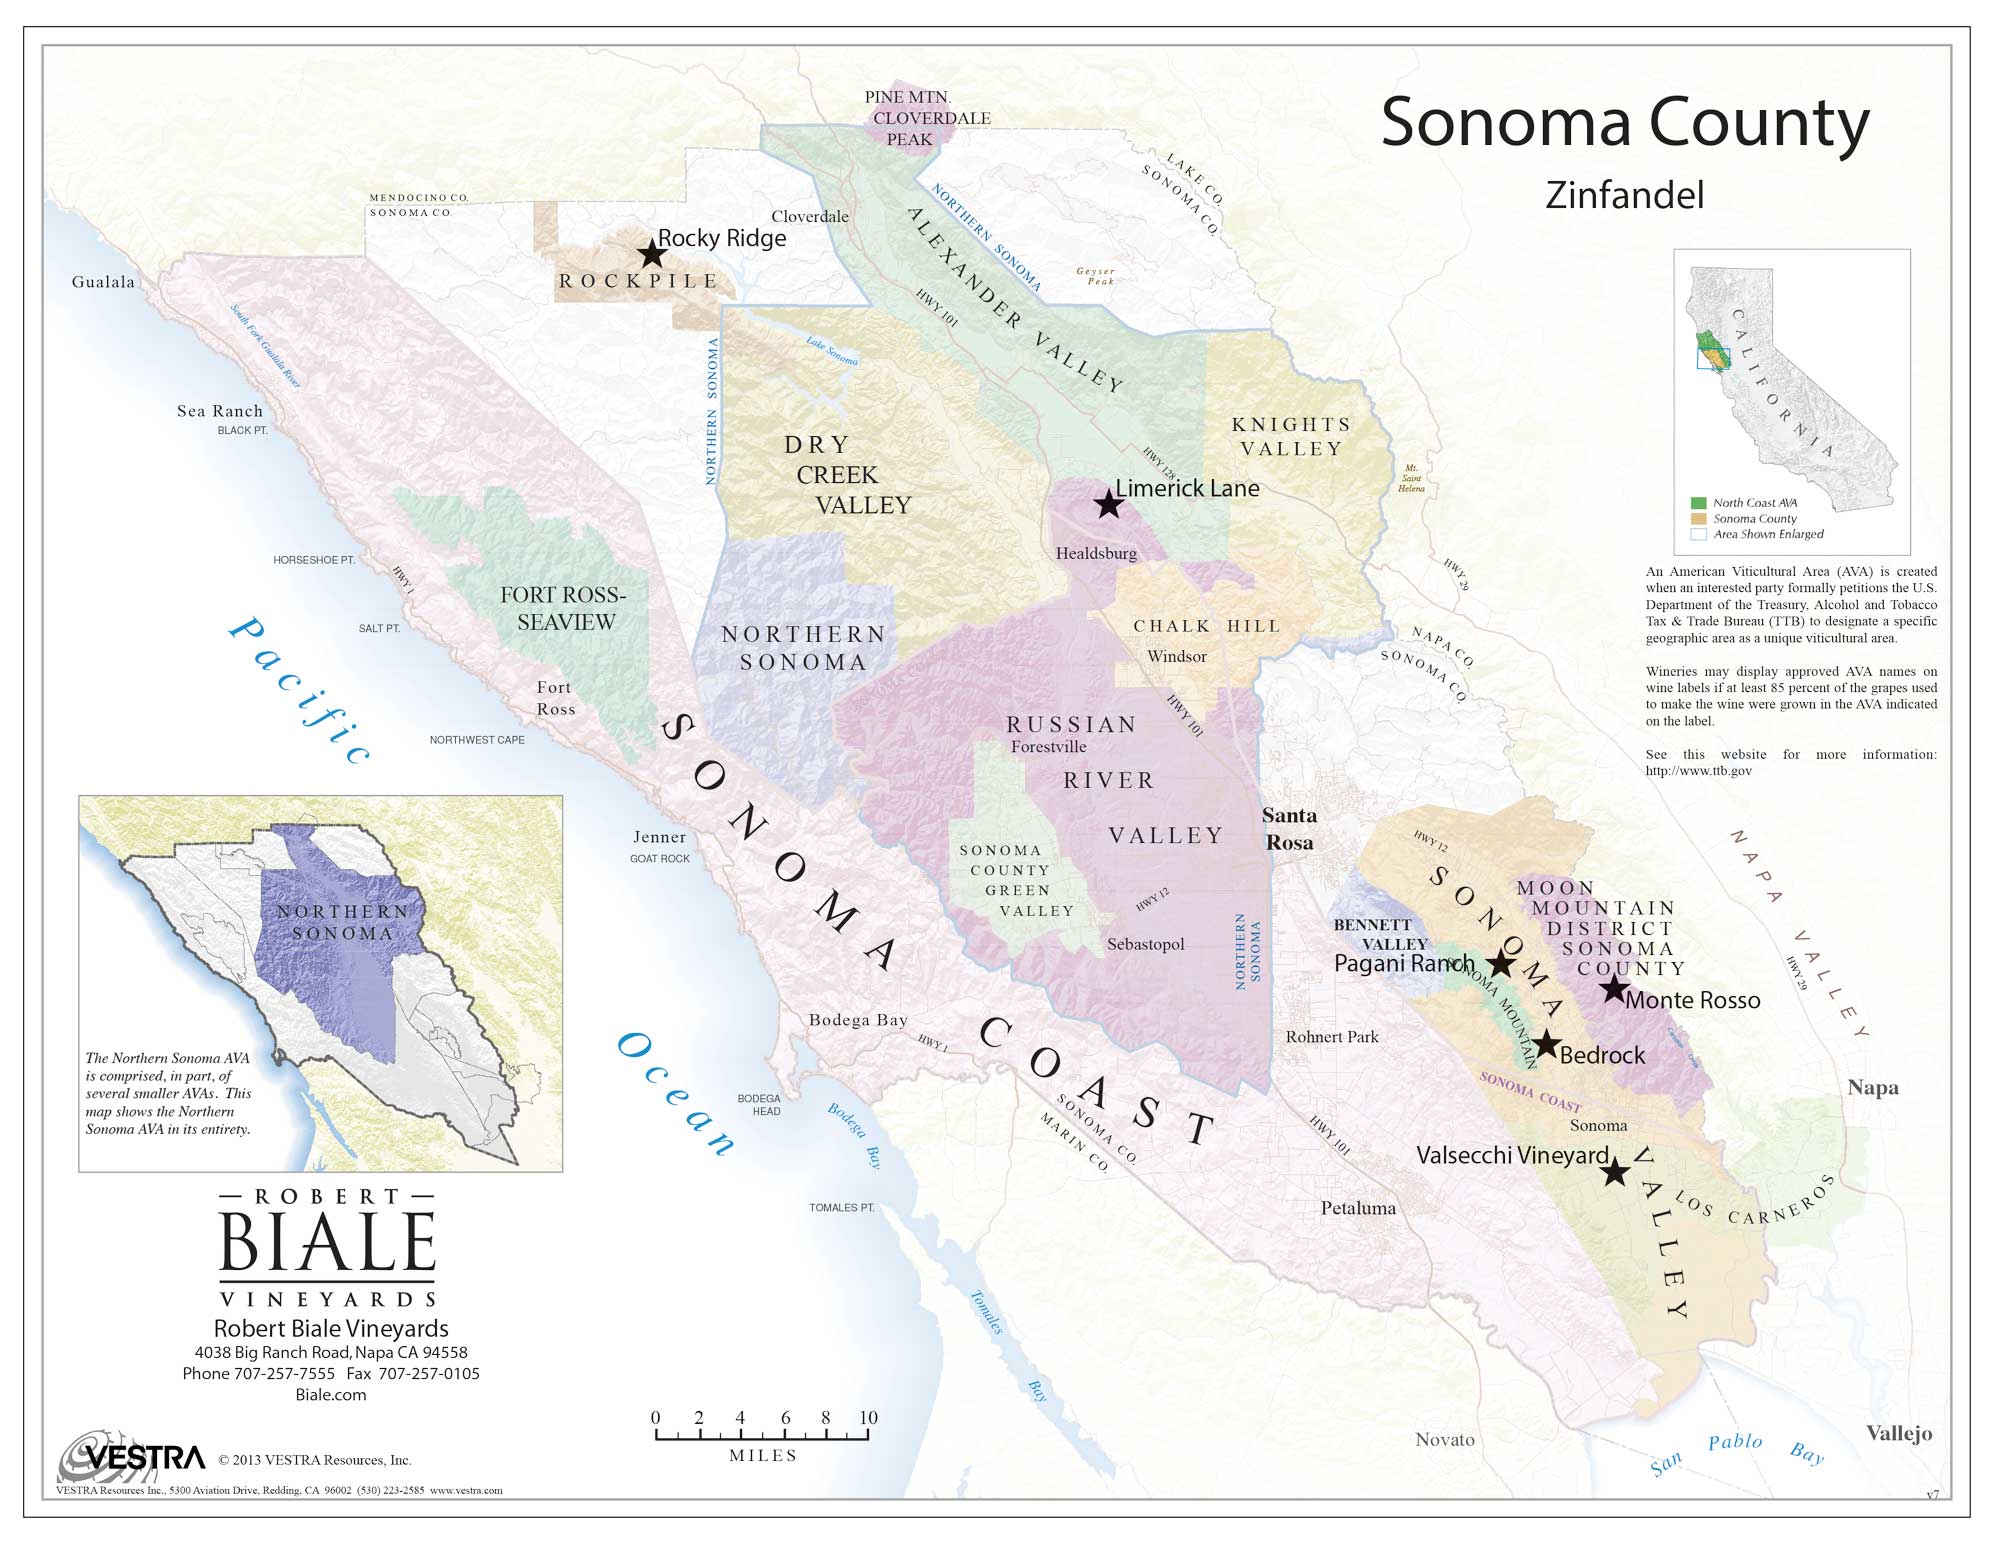 Biale map of Sonoma County vineyards